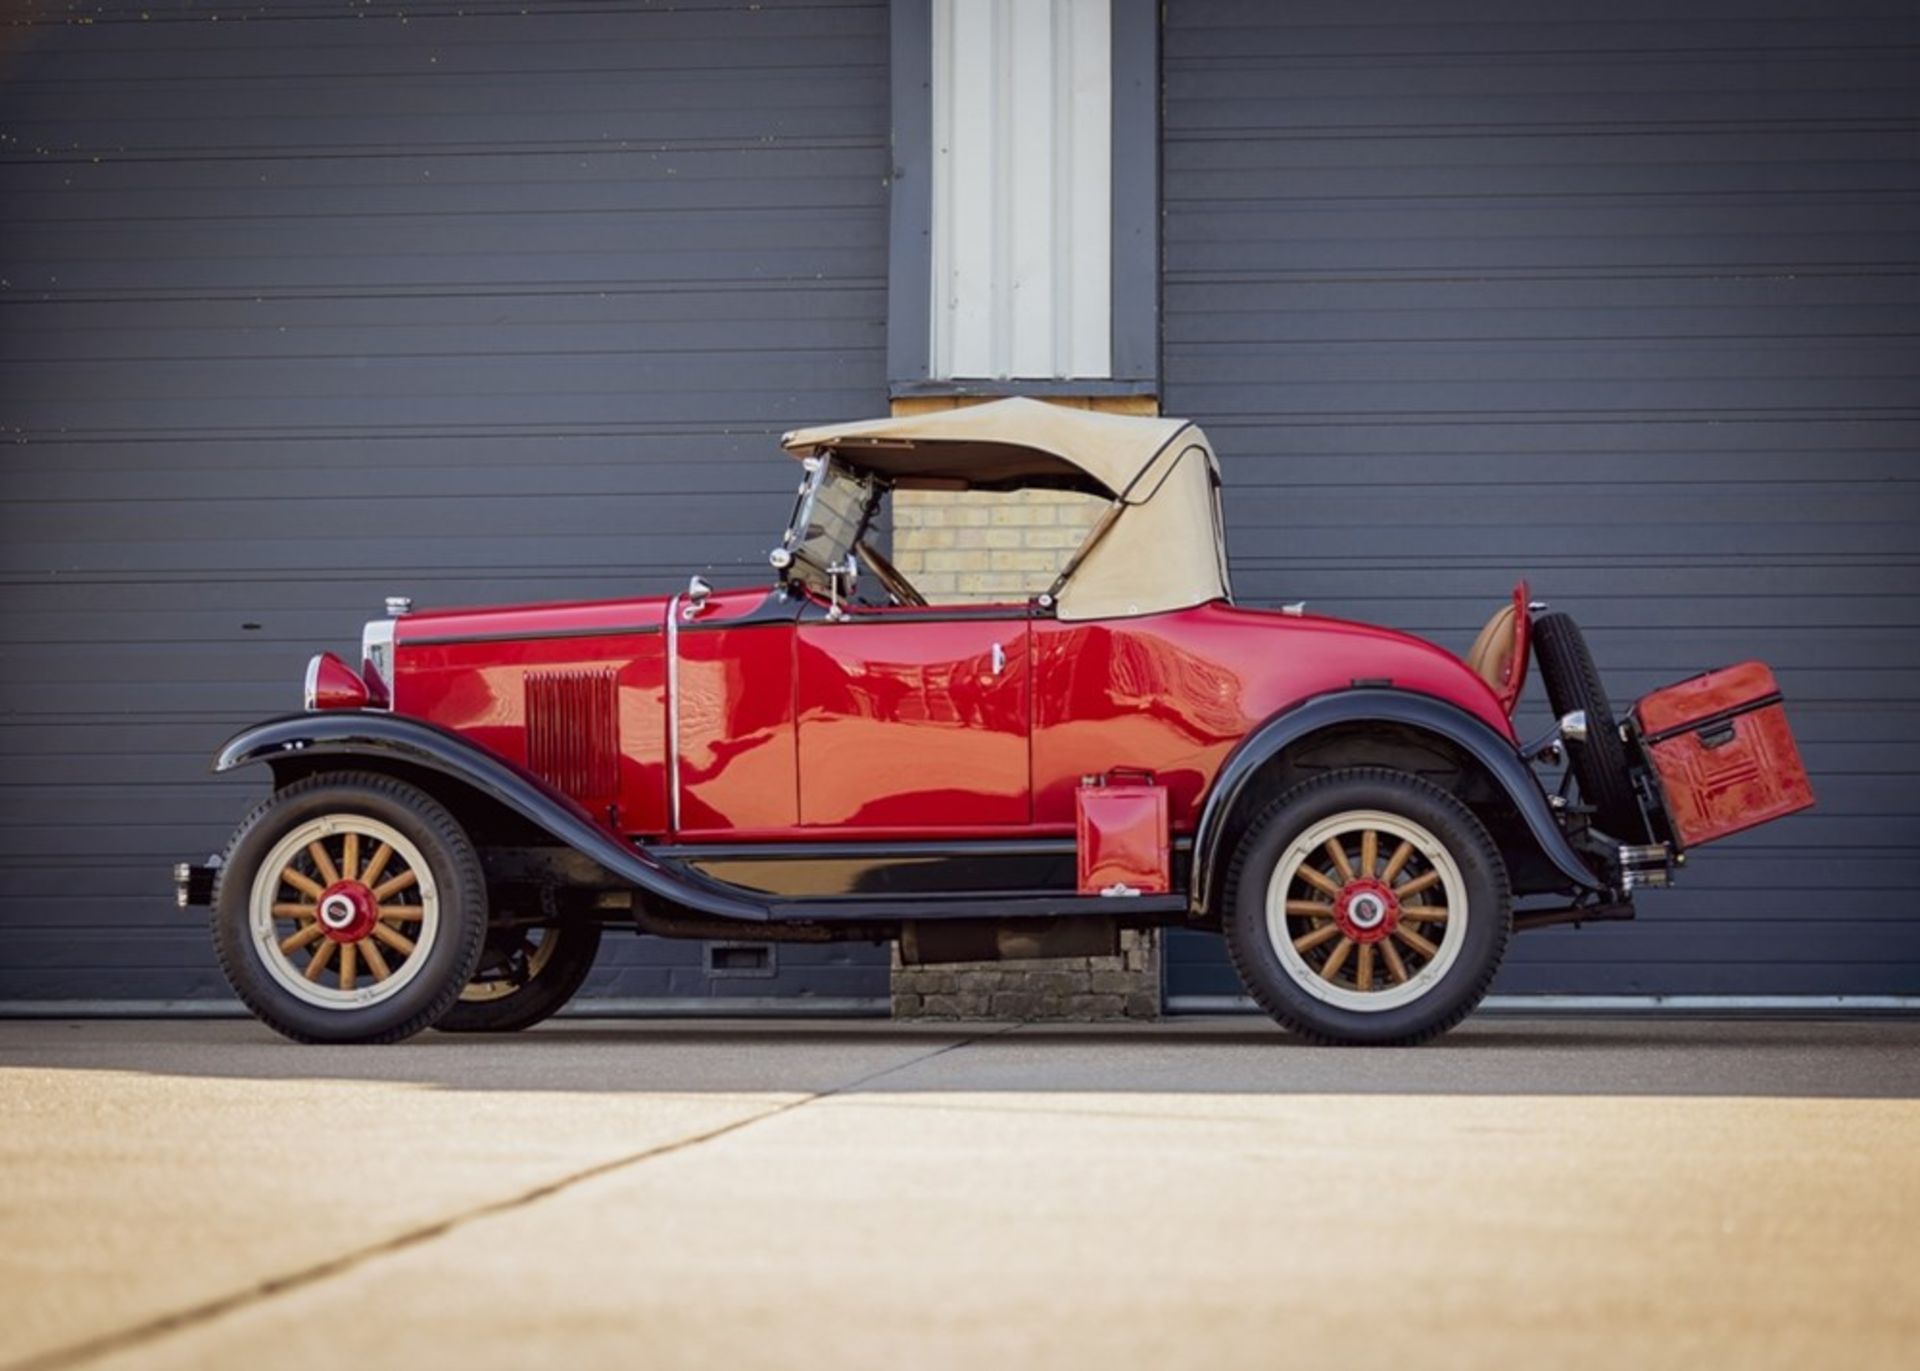 1930 Chevrolet Sports Roadster - Image 2 of 9